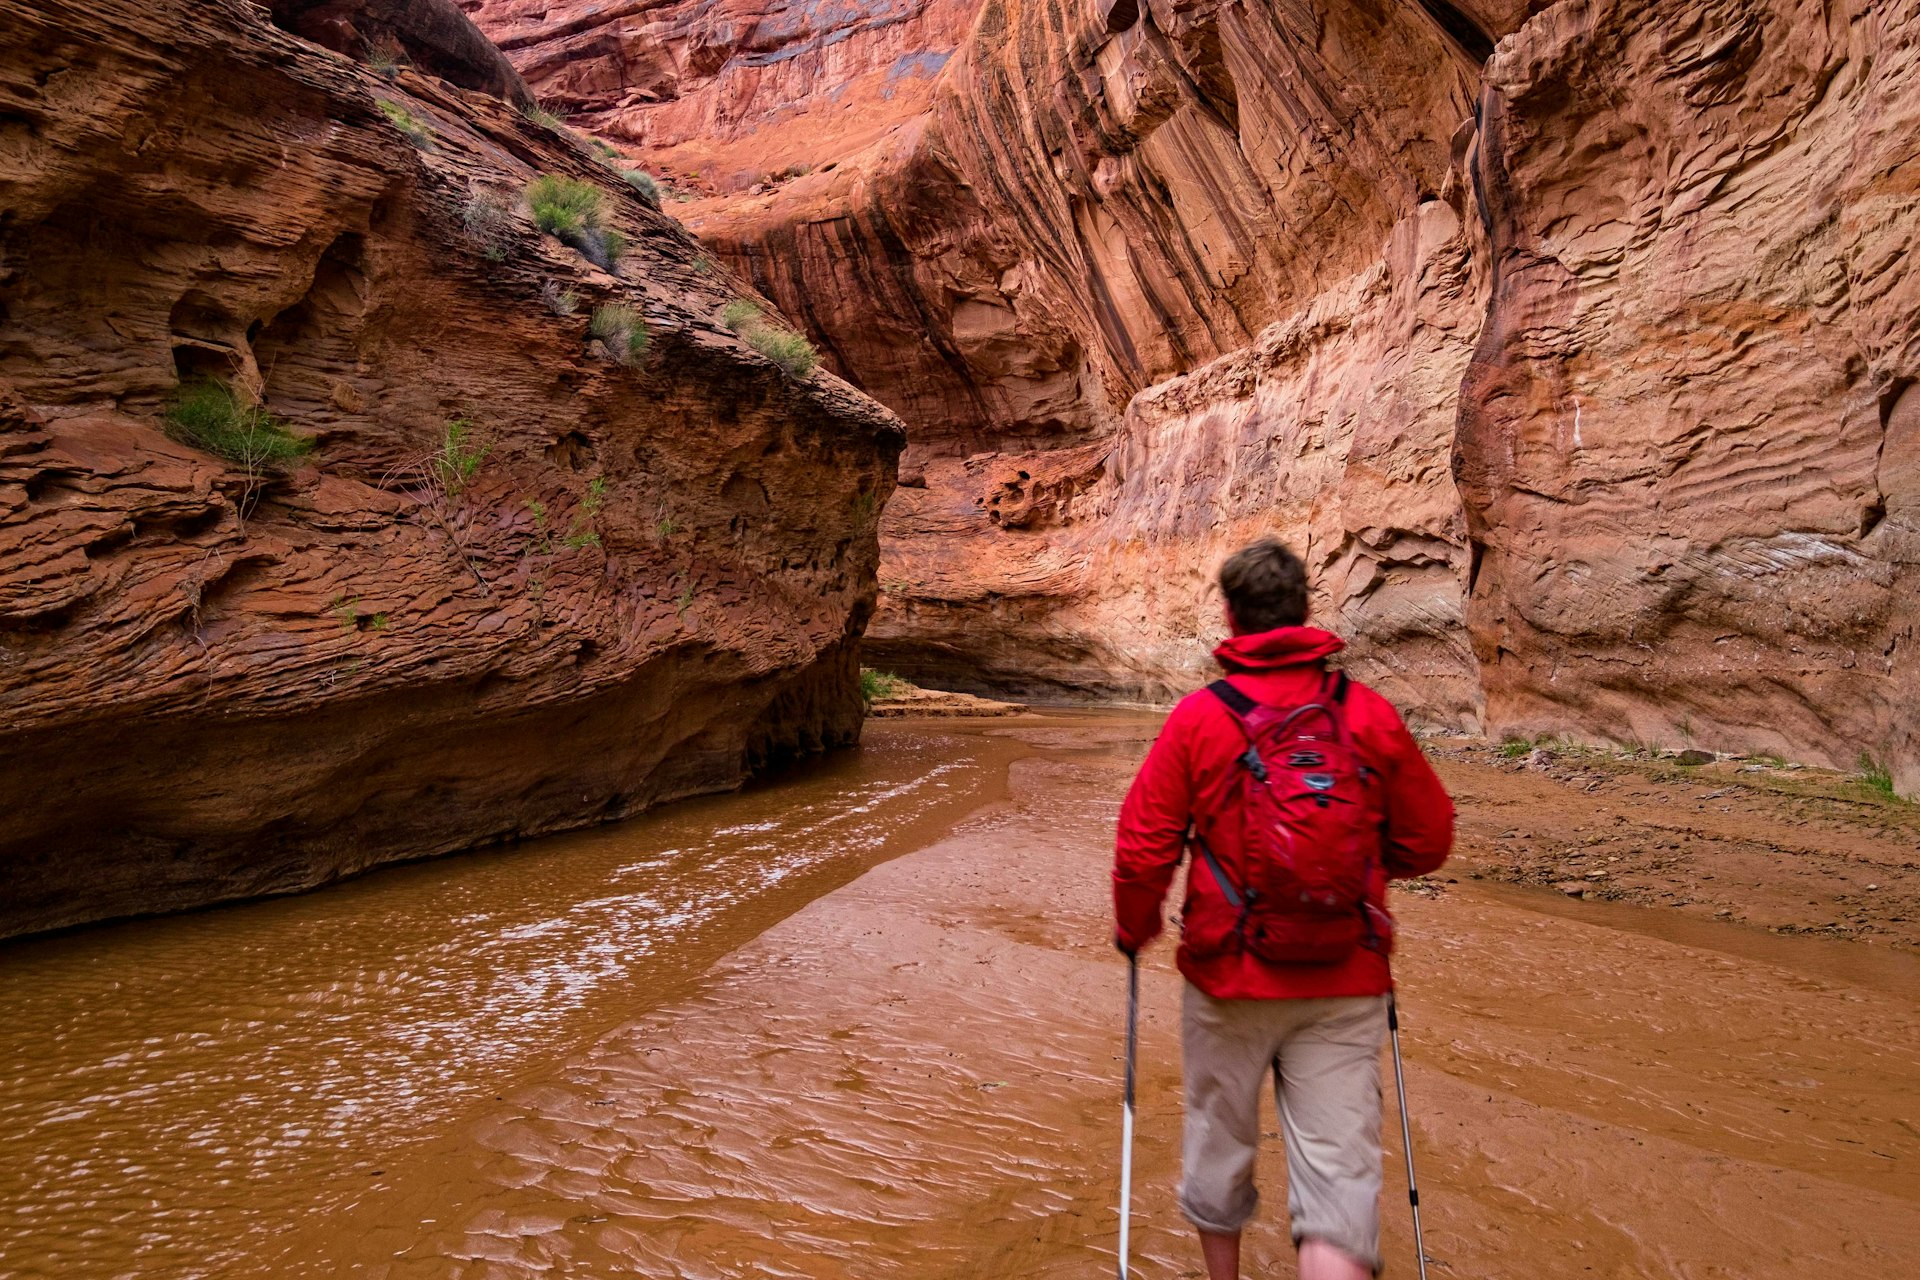 A man hiking through the red-rock walls of a slot canyon. Image by Adventure_Photo / E+ / Getty